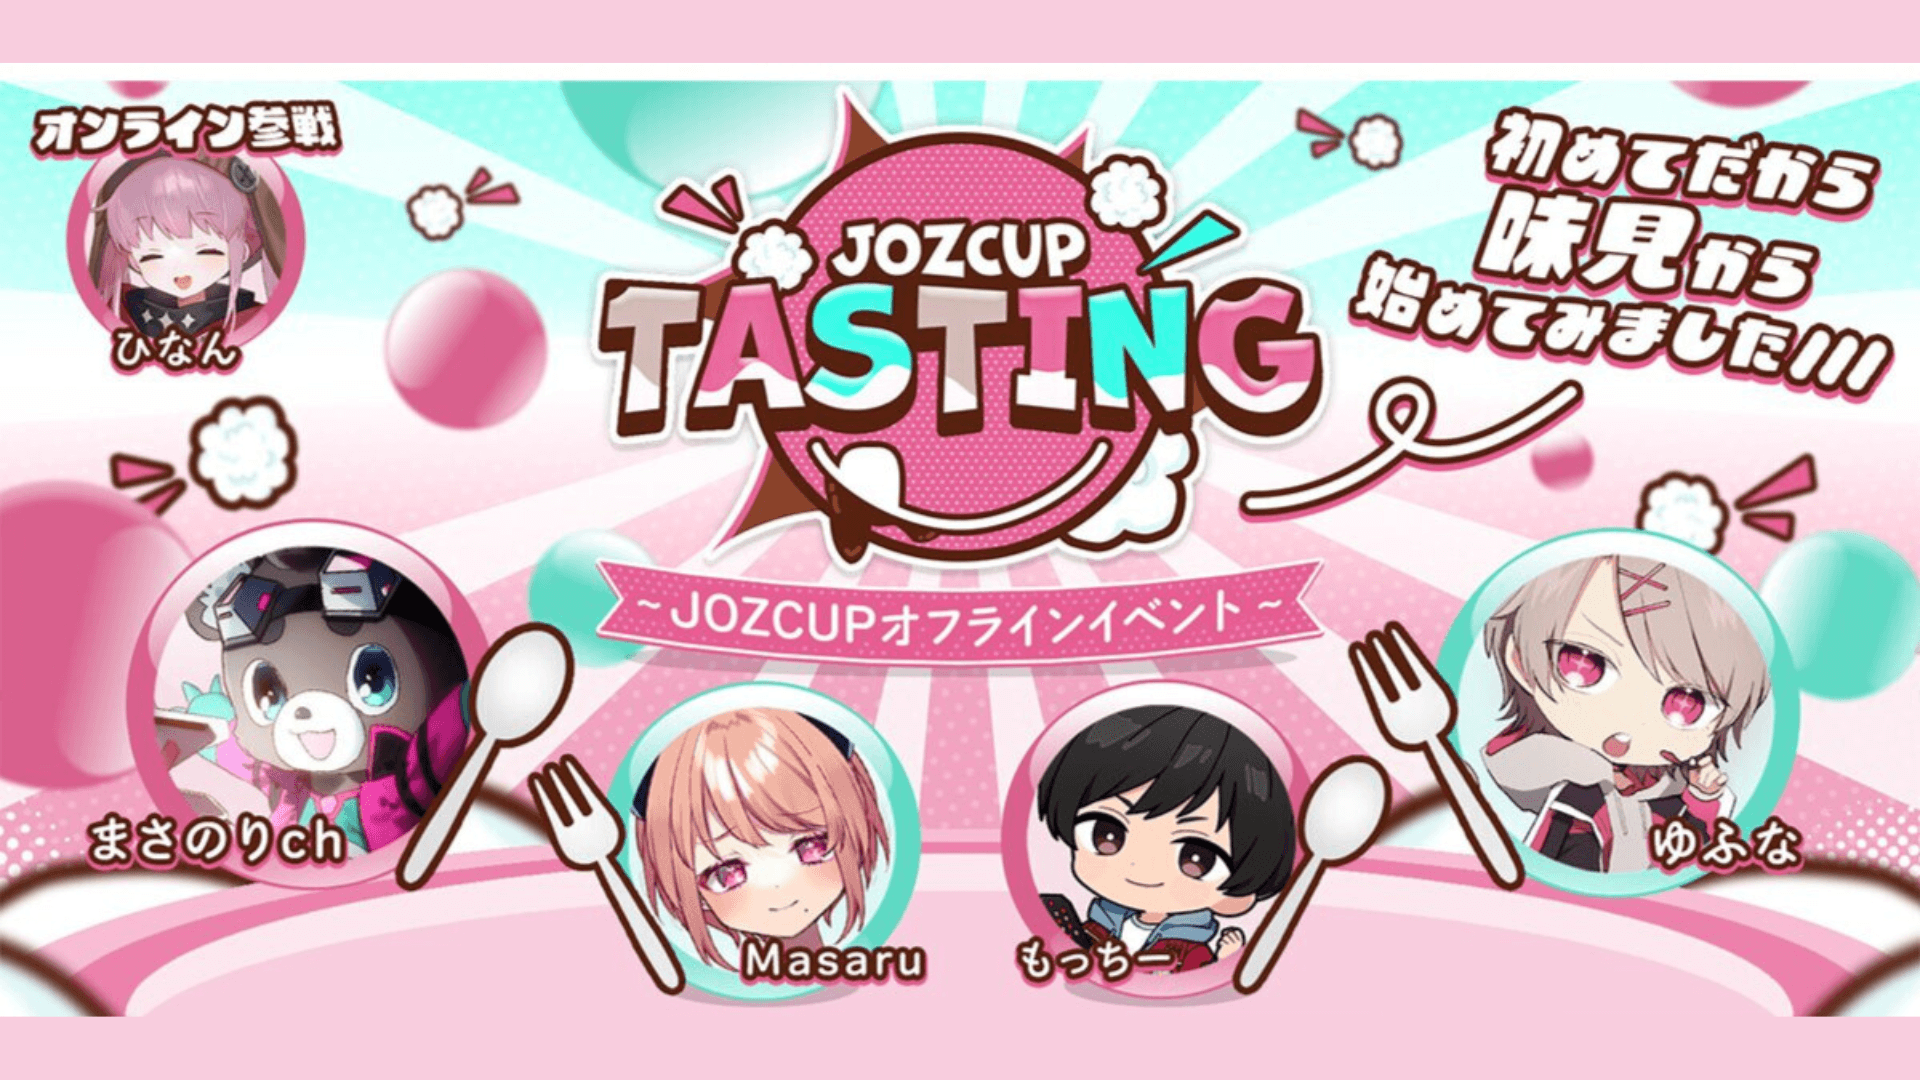 JOZCUP Tasting feature image